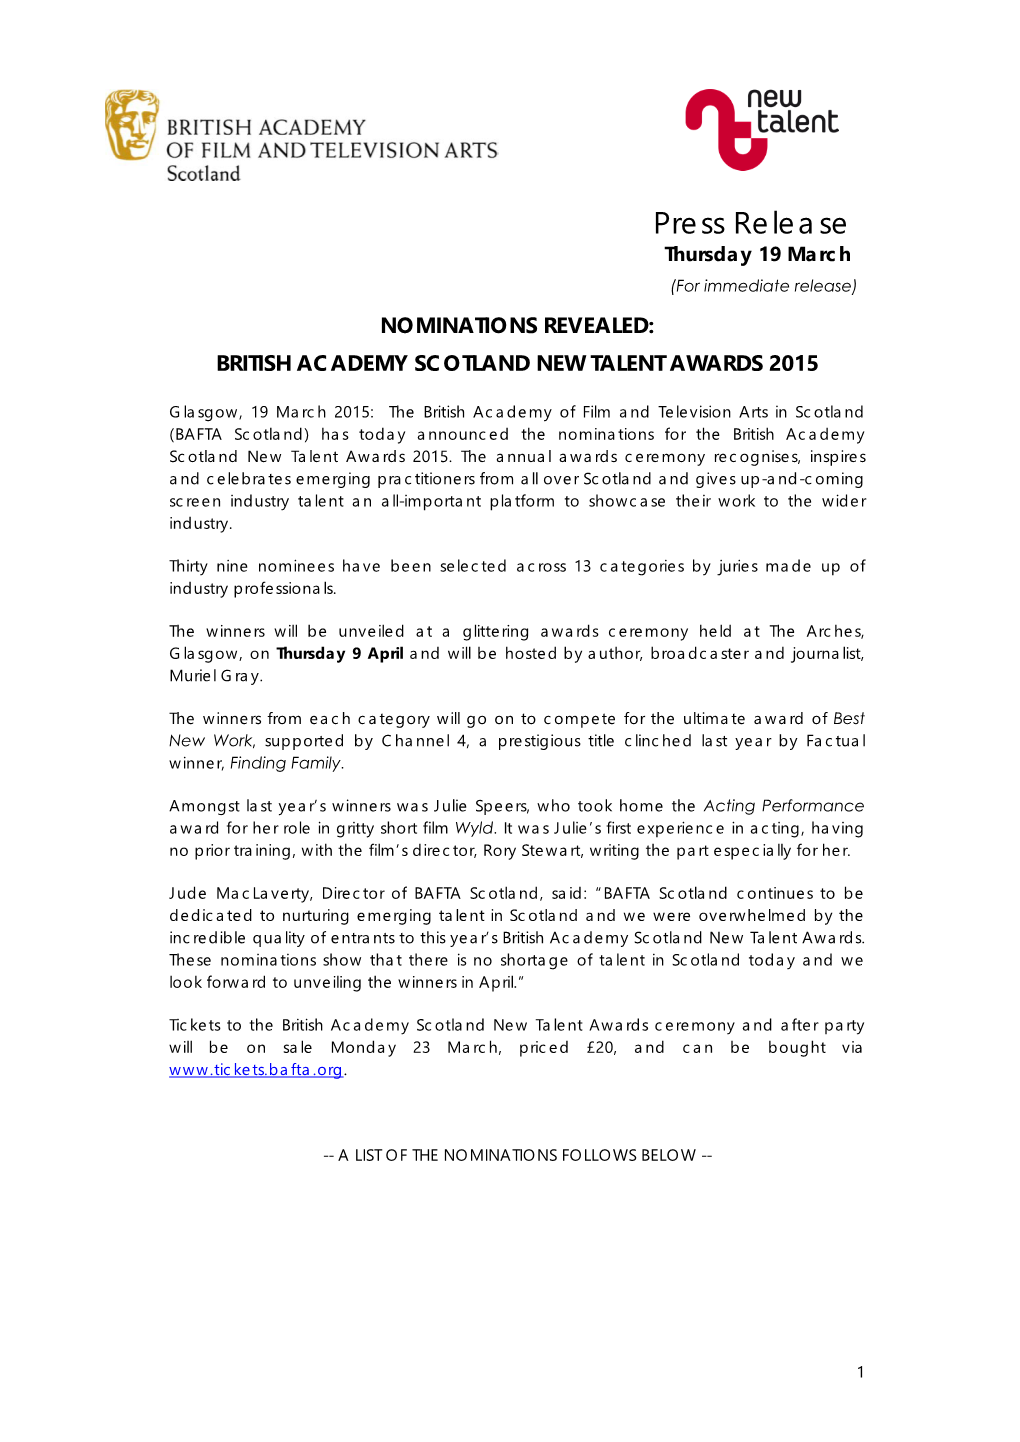 Press Release Thursday 19 March